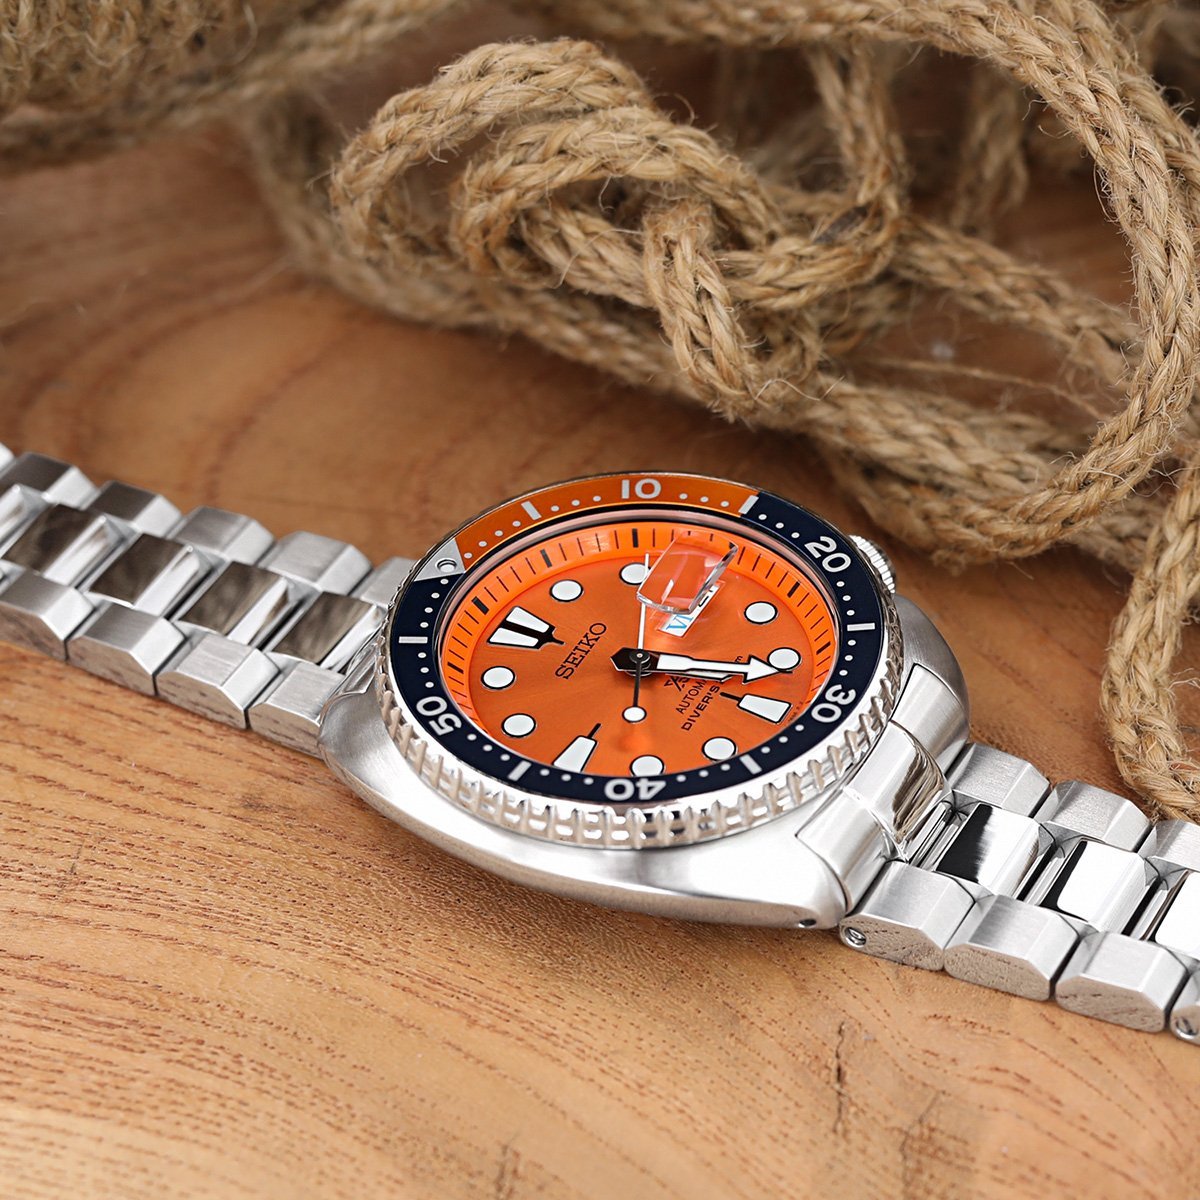 Seiko Prospex SRPC95K1 Divers Watch Limited Edition Orange New Turtle 200m Strapcode Watch Bands